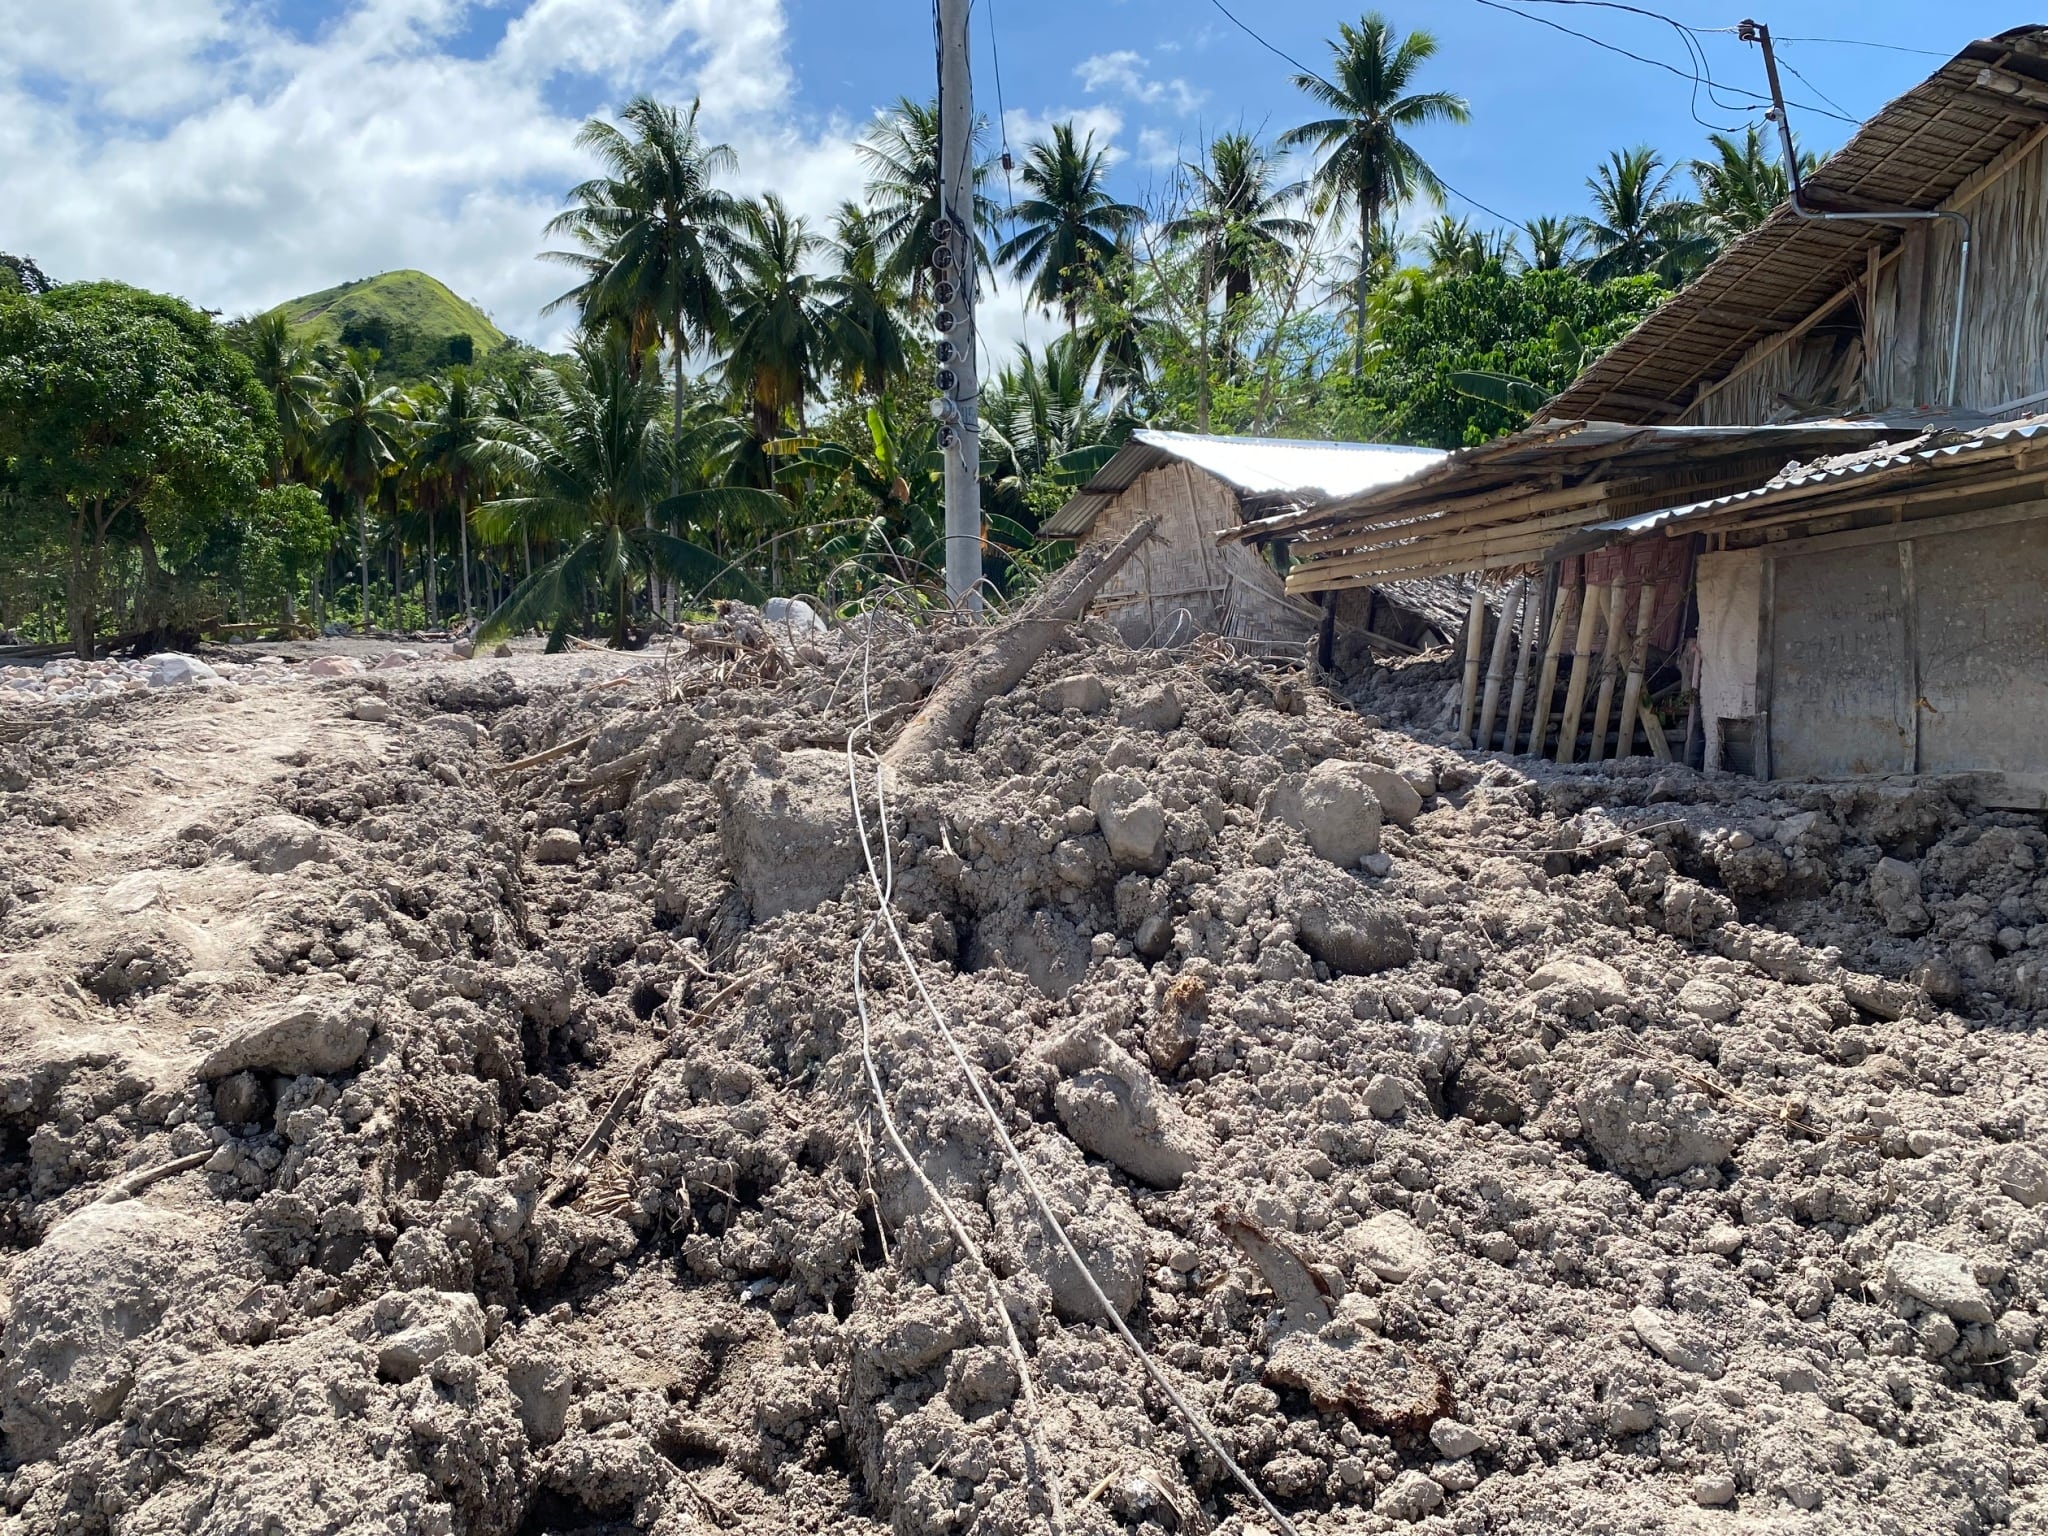 Houses were wiped out by mud and boulders in a community beside a mountain in Brgy. Kusiong, Datu Odin Sinsuat, Maguindanao del Norte. 【Photo by Harold Alzaga】